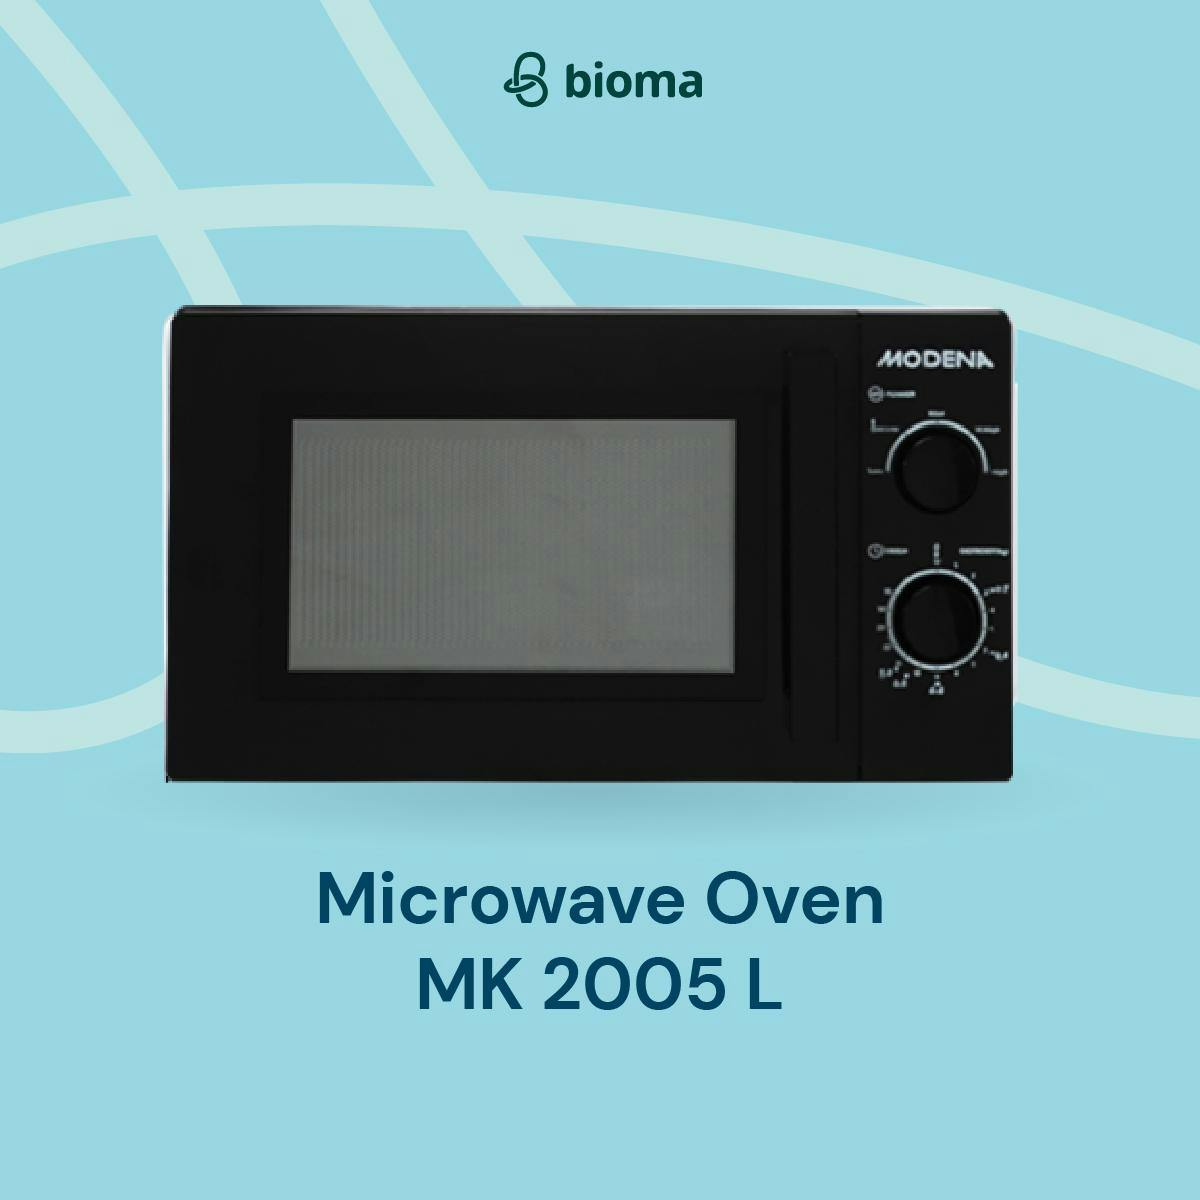 Microwave Oven MK 2005 L